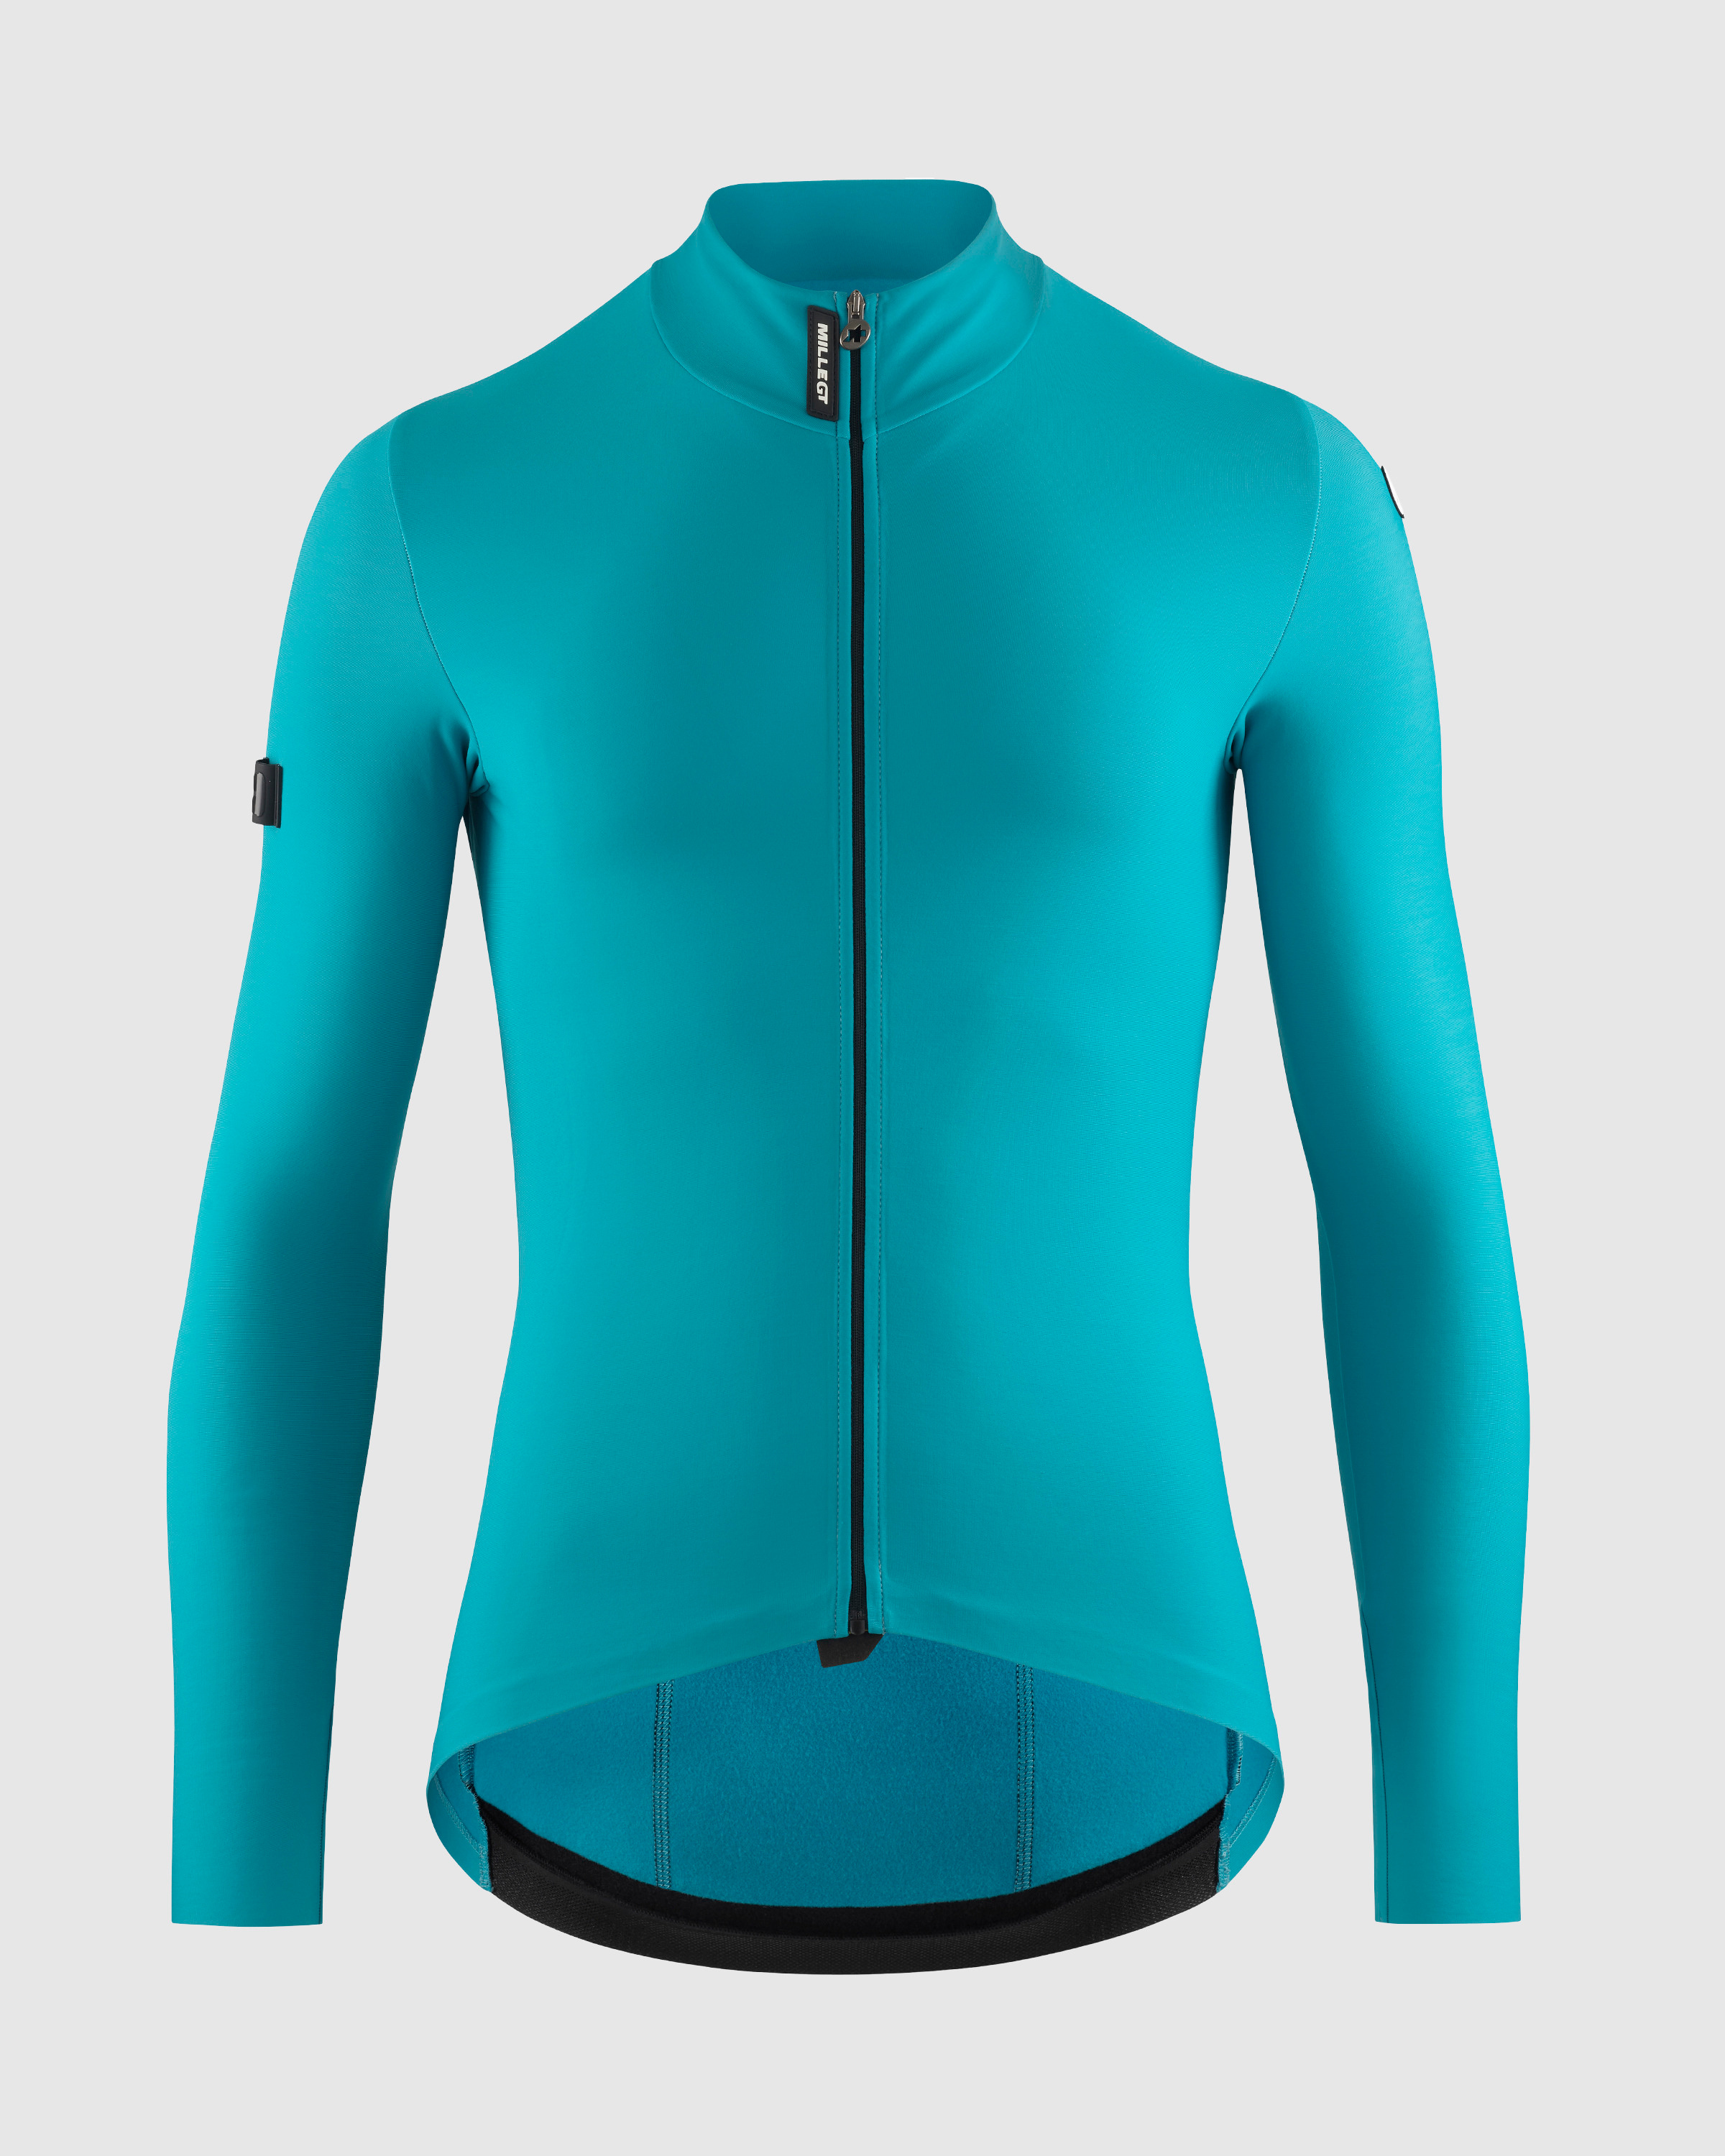 MILLE GT Spring Fall LS Jersey C2, Turquoise Green » ASSOS Of 